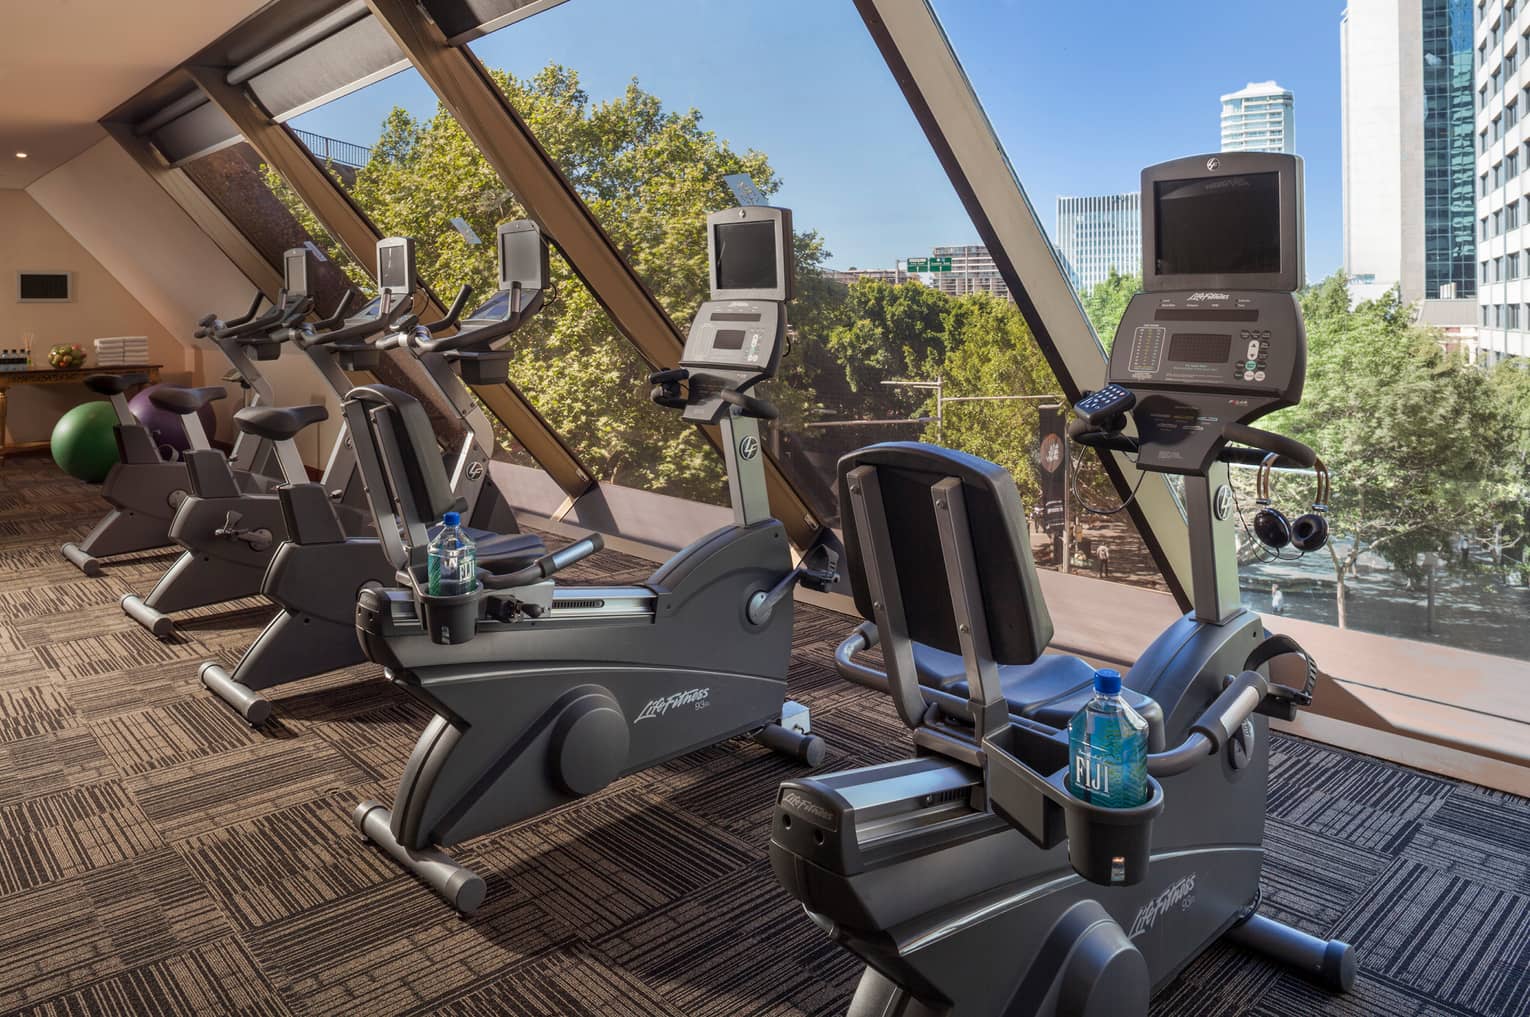 Cardio bikes, machines lined up by window in Fitness Centre